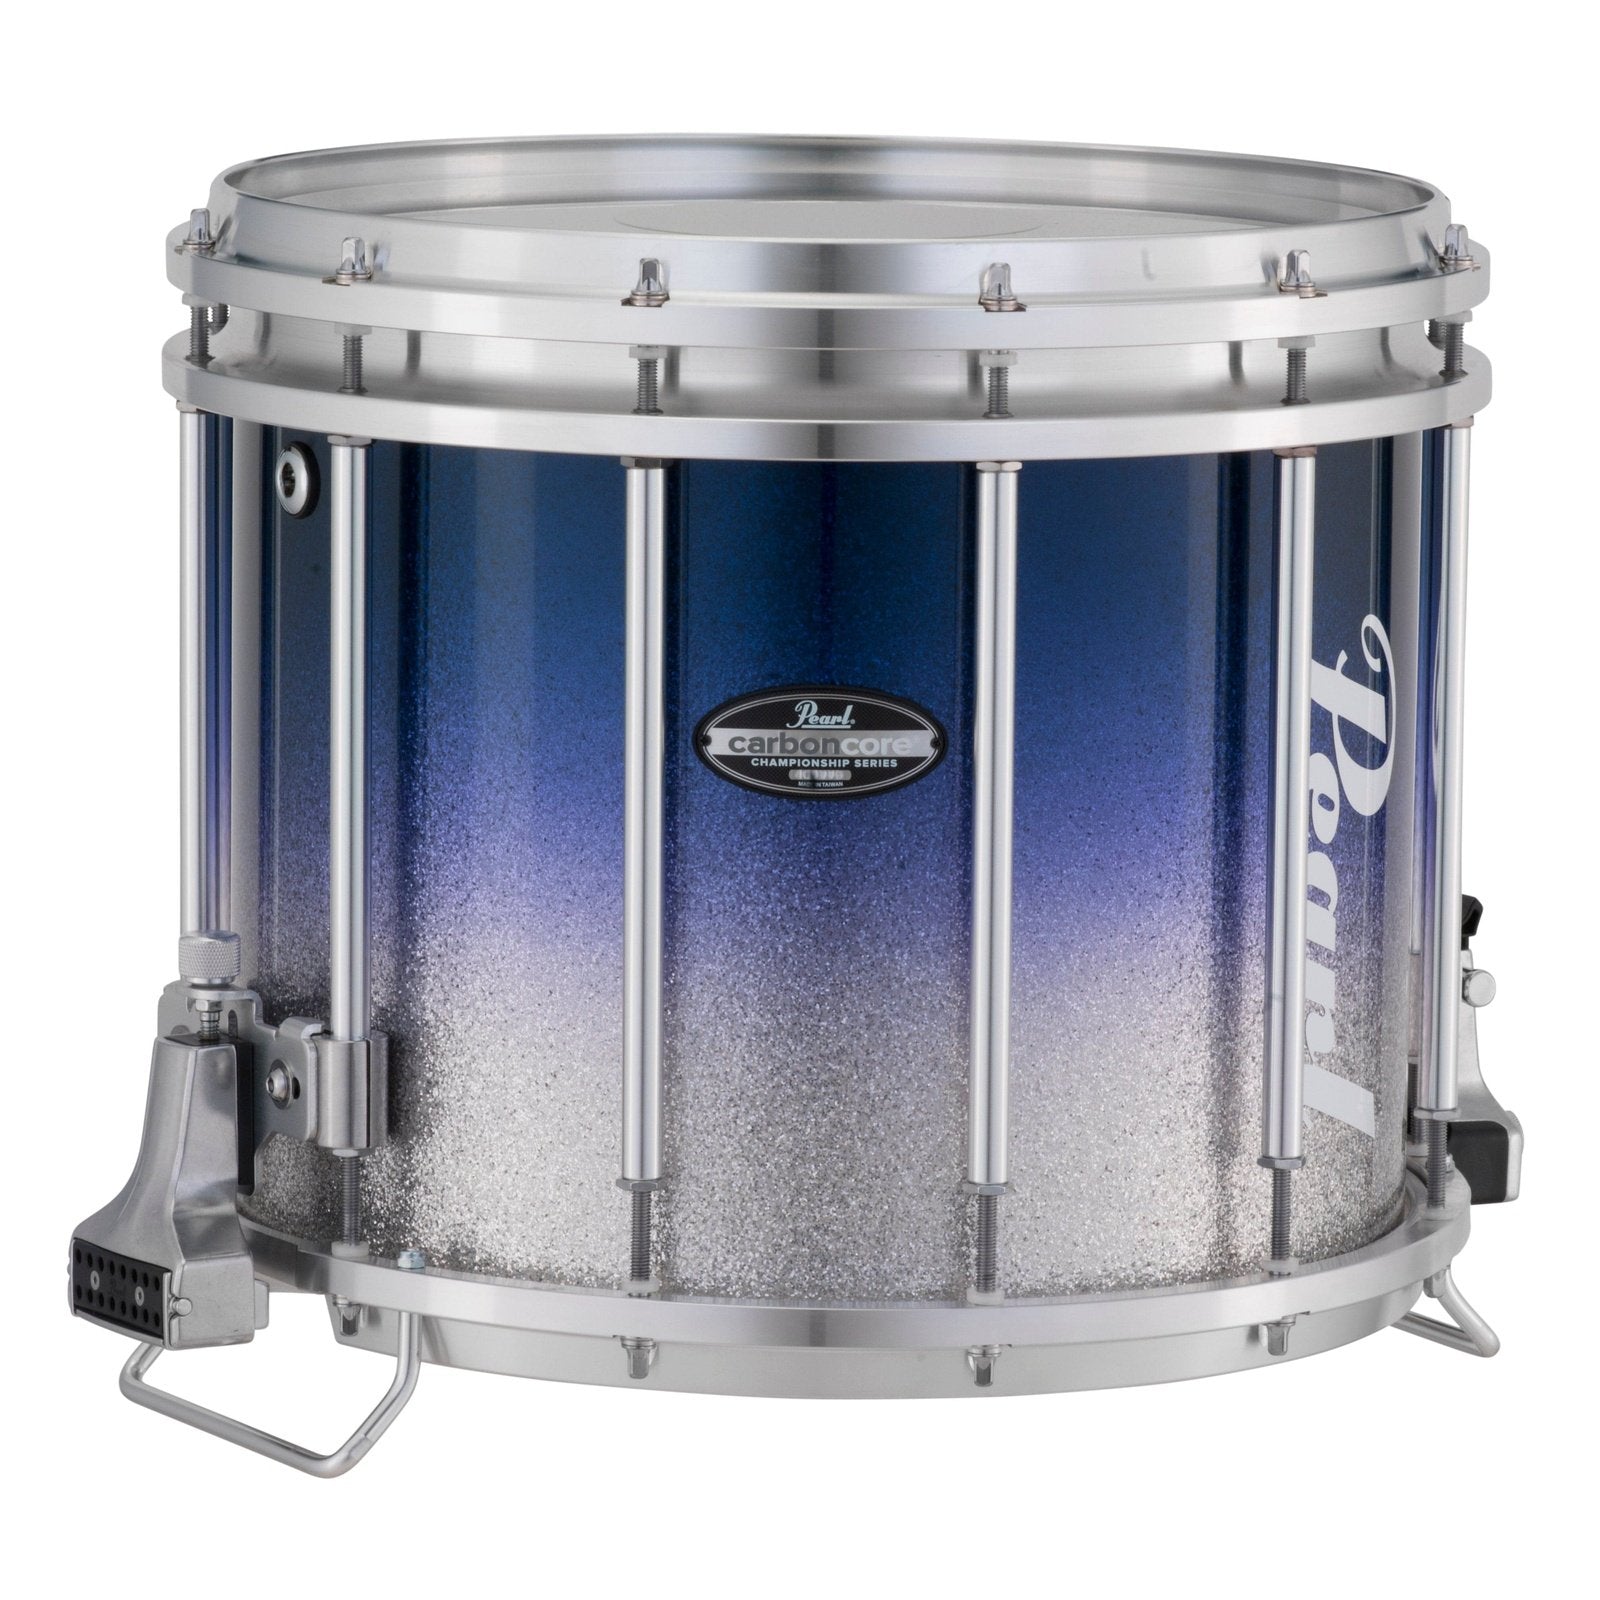 Pearl Championship Carbon Ply Marching Snare FFXC1311/A301 – Music World